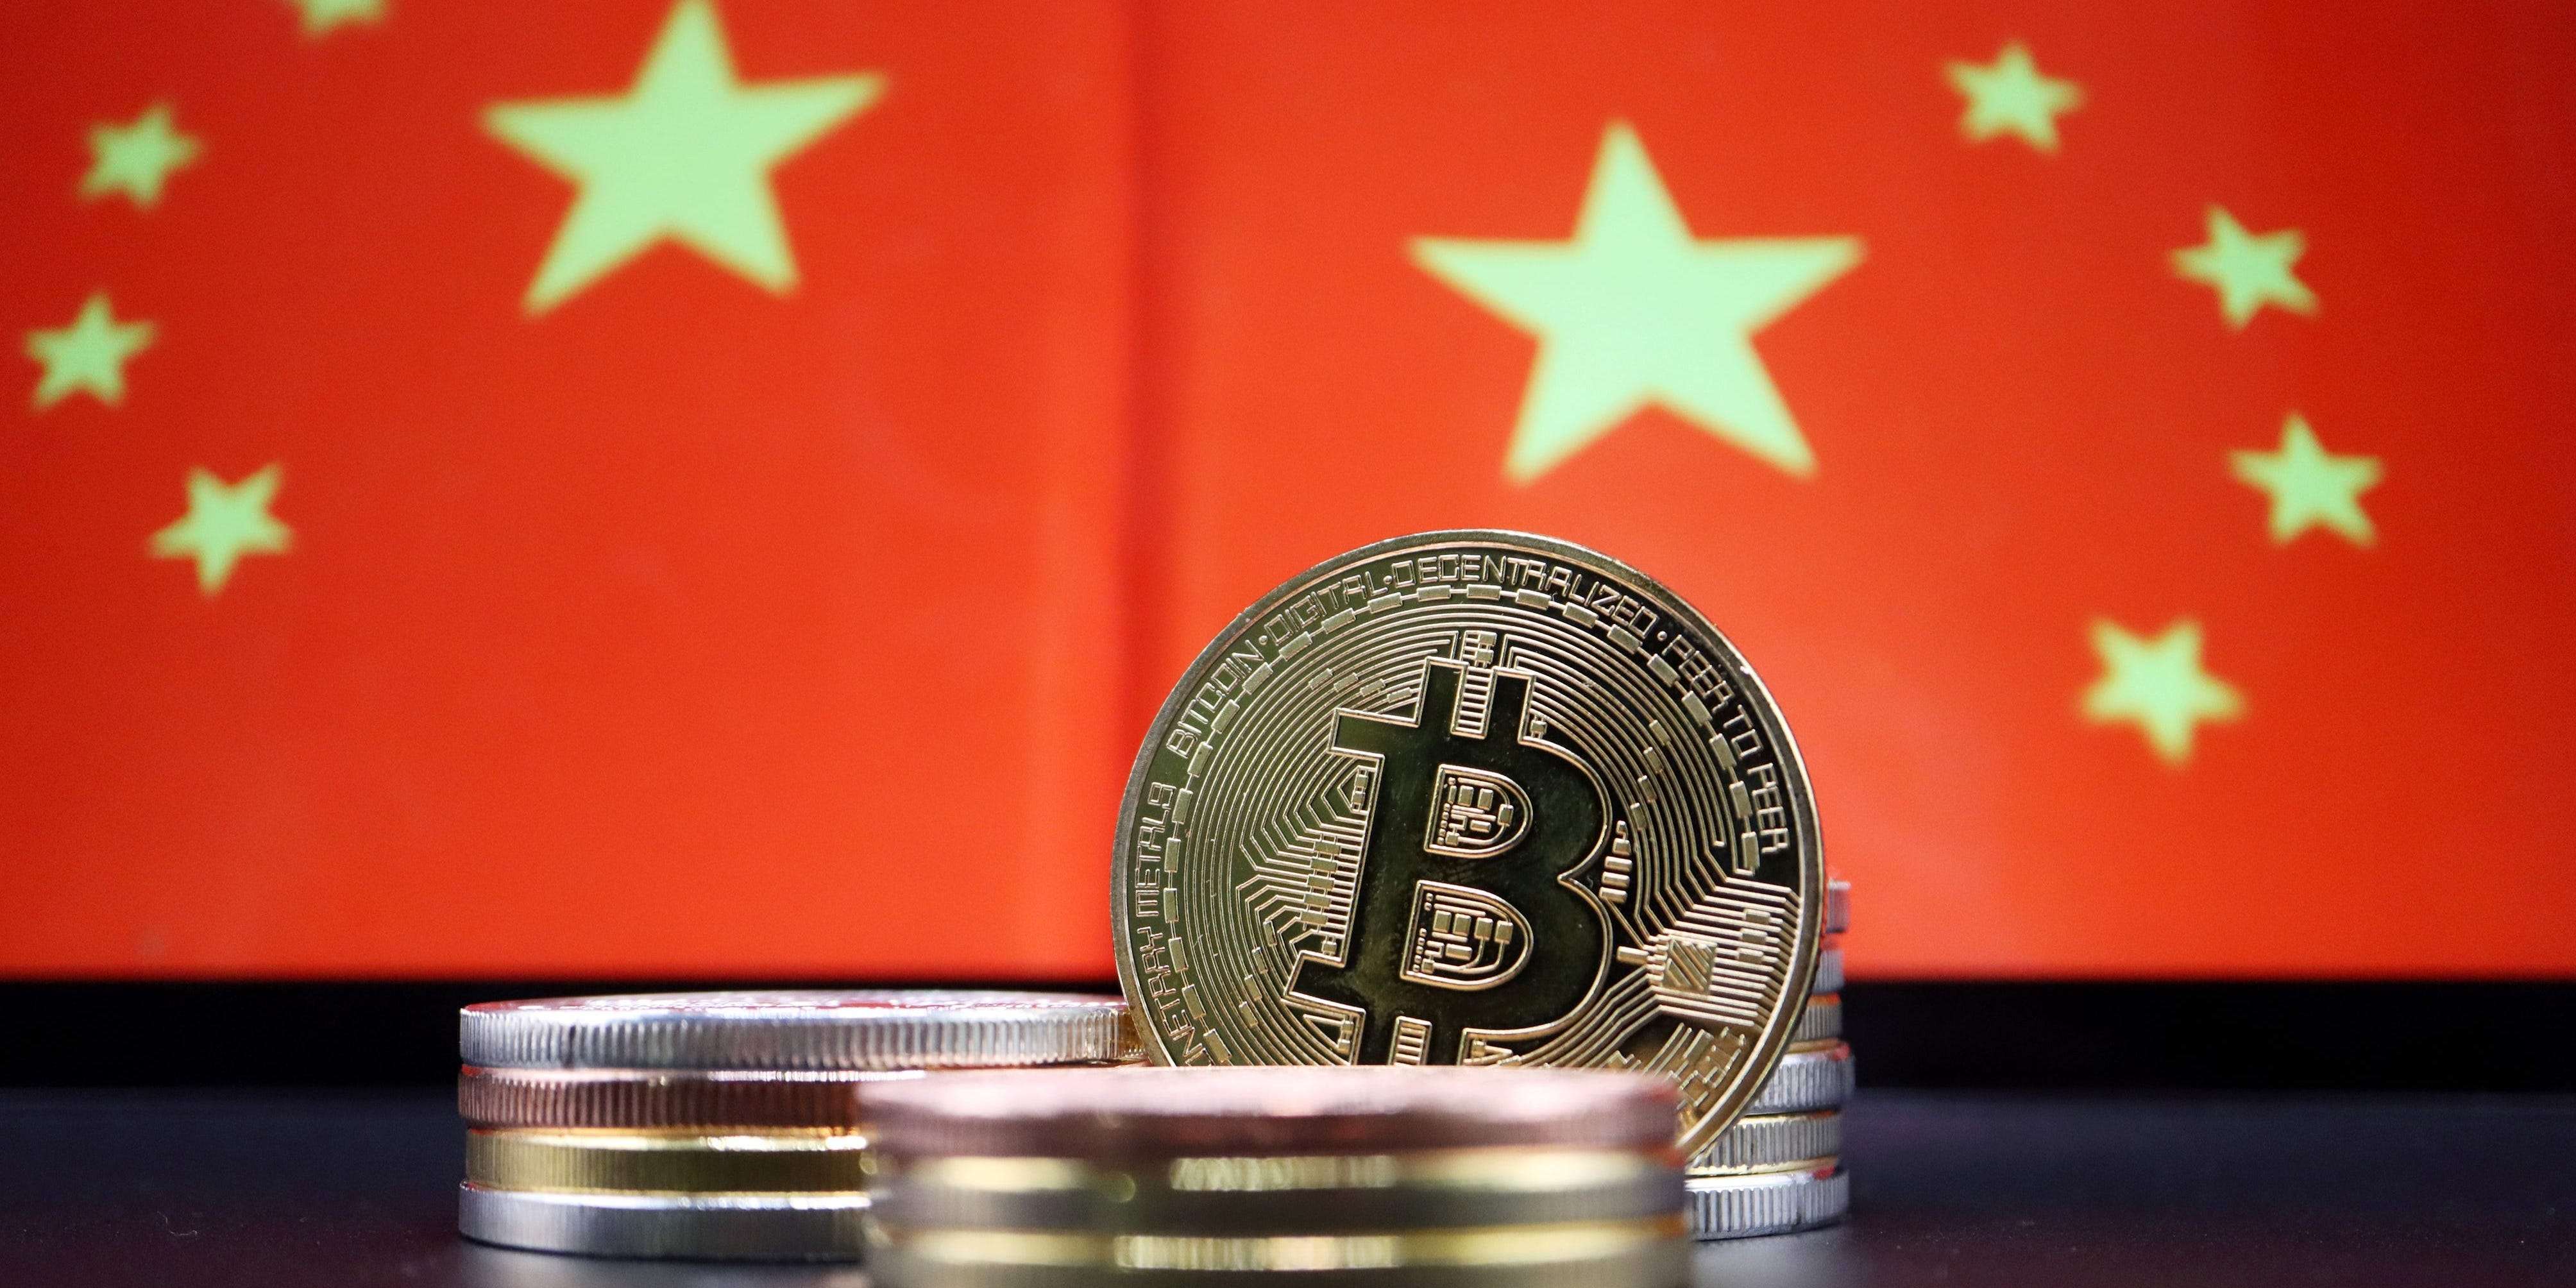 Bitcoin tumbles 11% after China steps up crackdown on ...